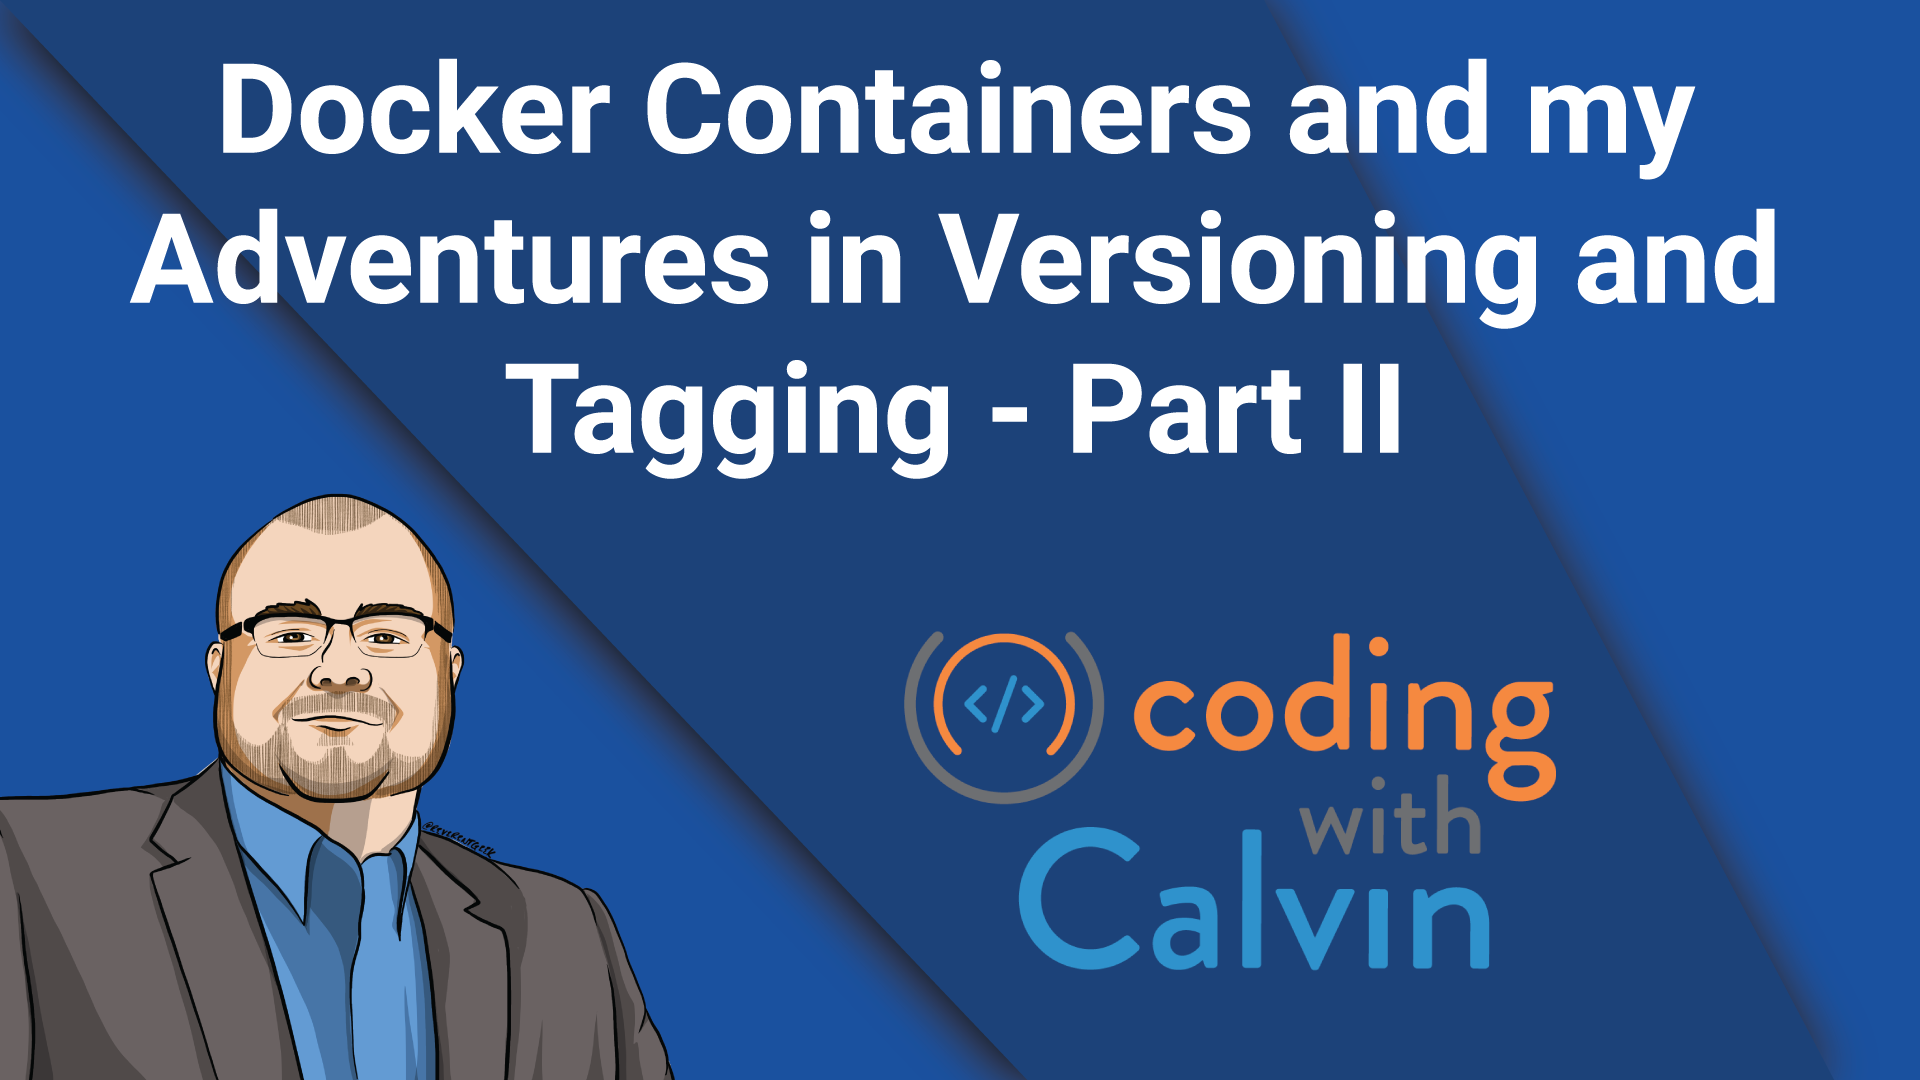 Docker Containers and my Adventures in Versioning and Tagging - Part II